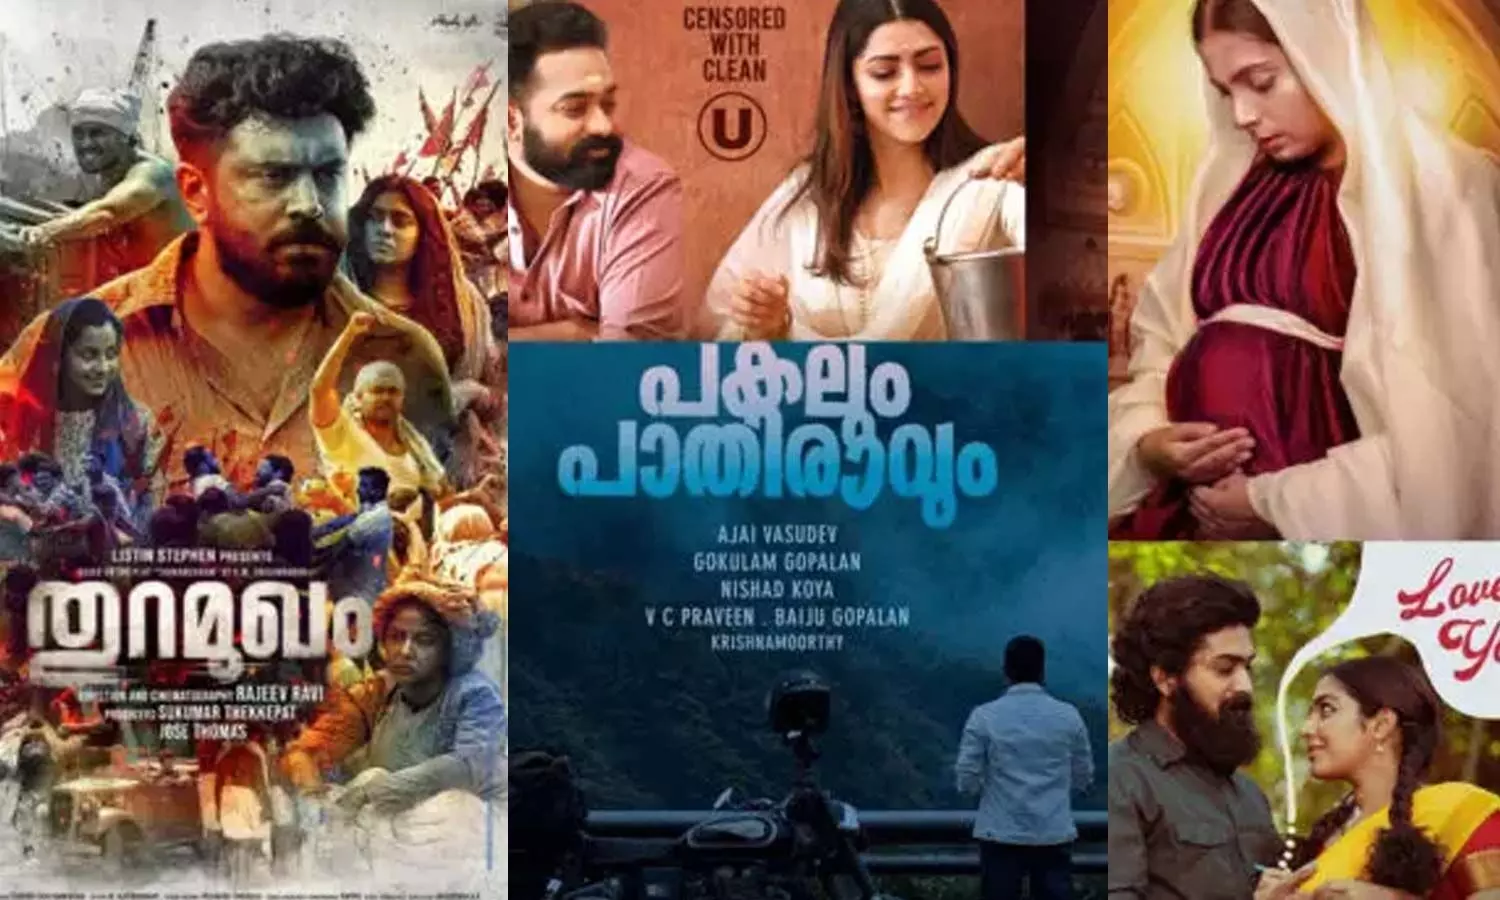 Malayalam Movies: How about releasing 20 movies per month?